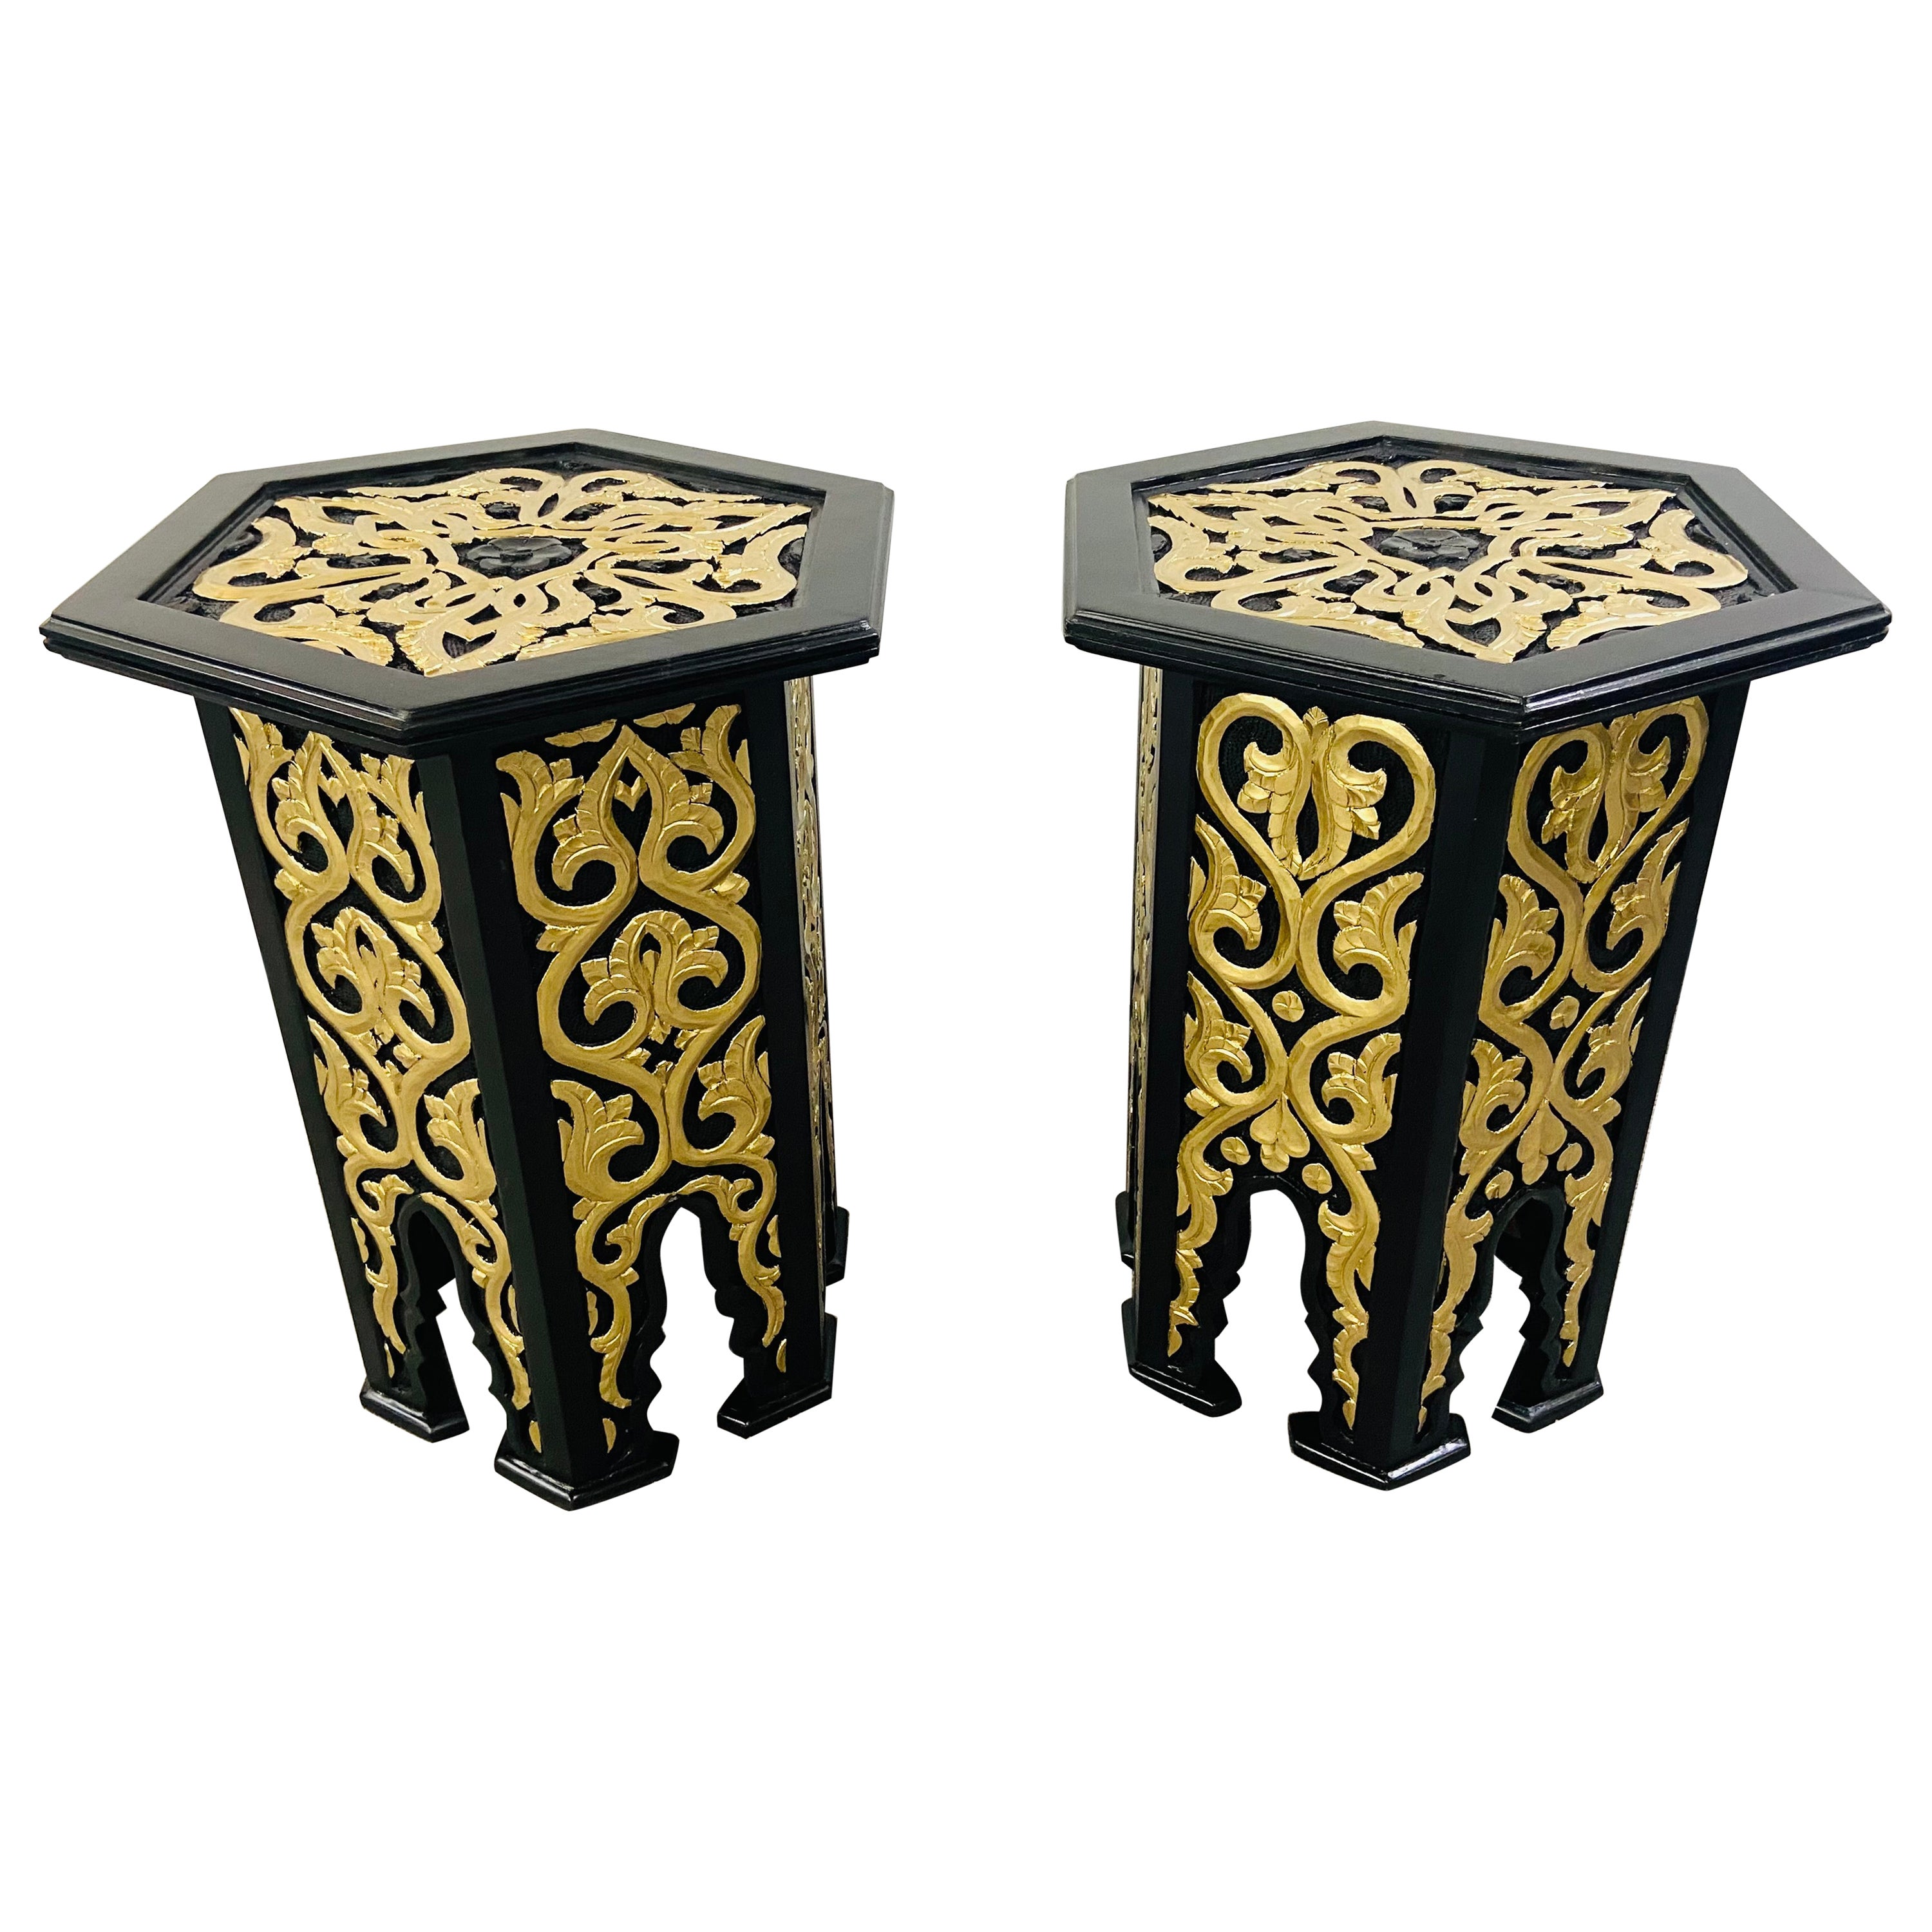 Hollywood Regency Moroccan Stye Side or End Table Black with Gold Design, a Pair For Sale